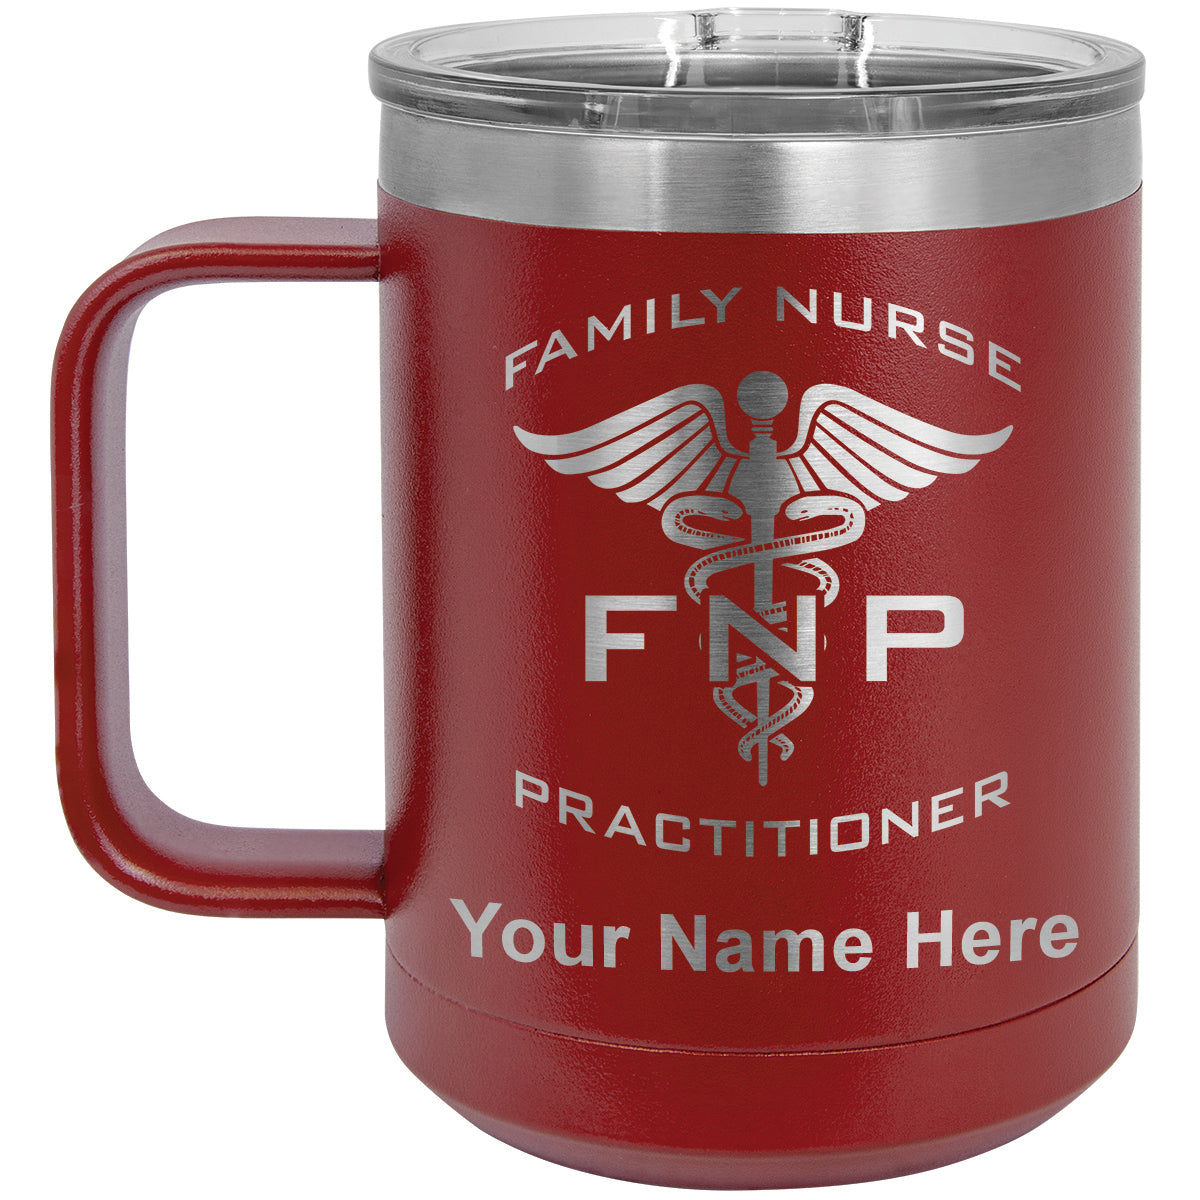 15oz Vacuum Insulated Coffee Mug, FNP Family Nurse Practitioner, Personalized Engraving Included